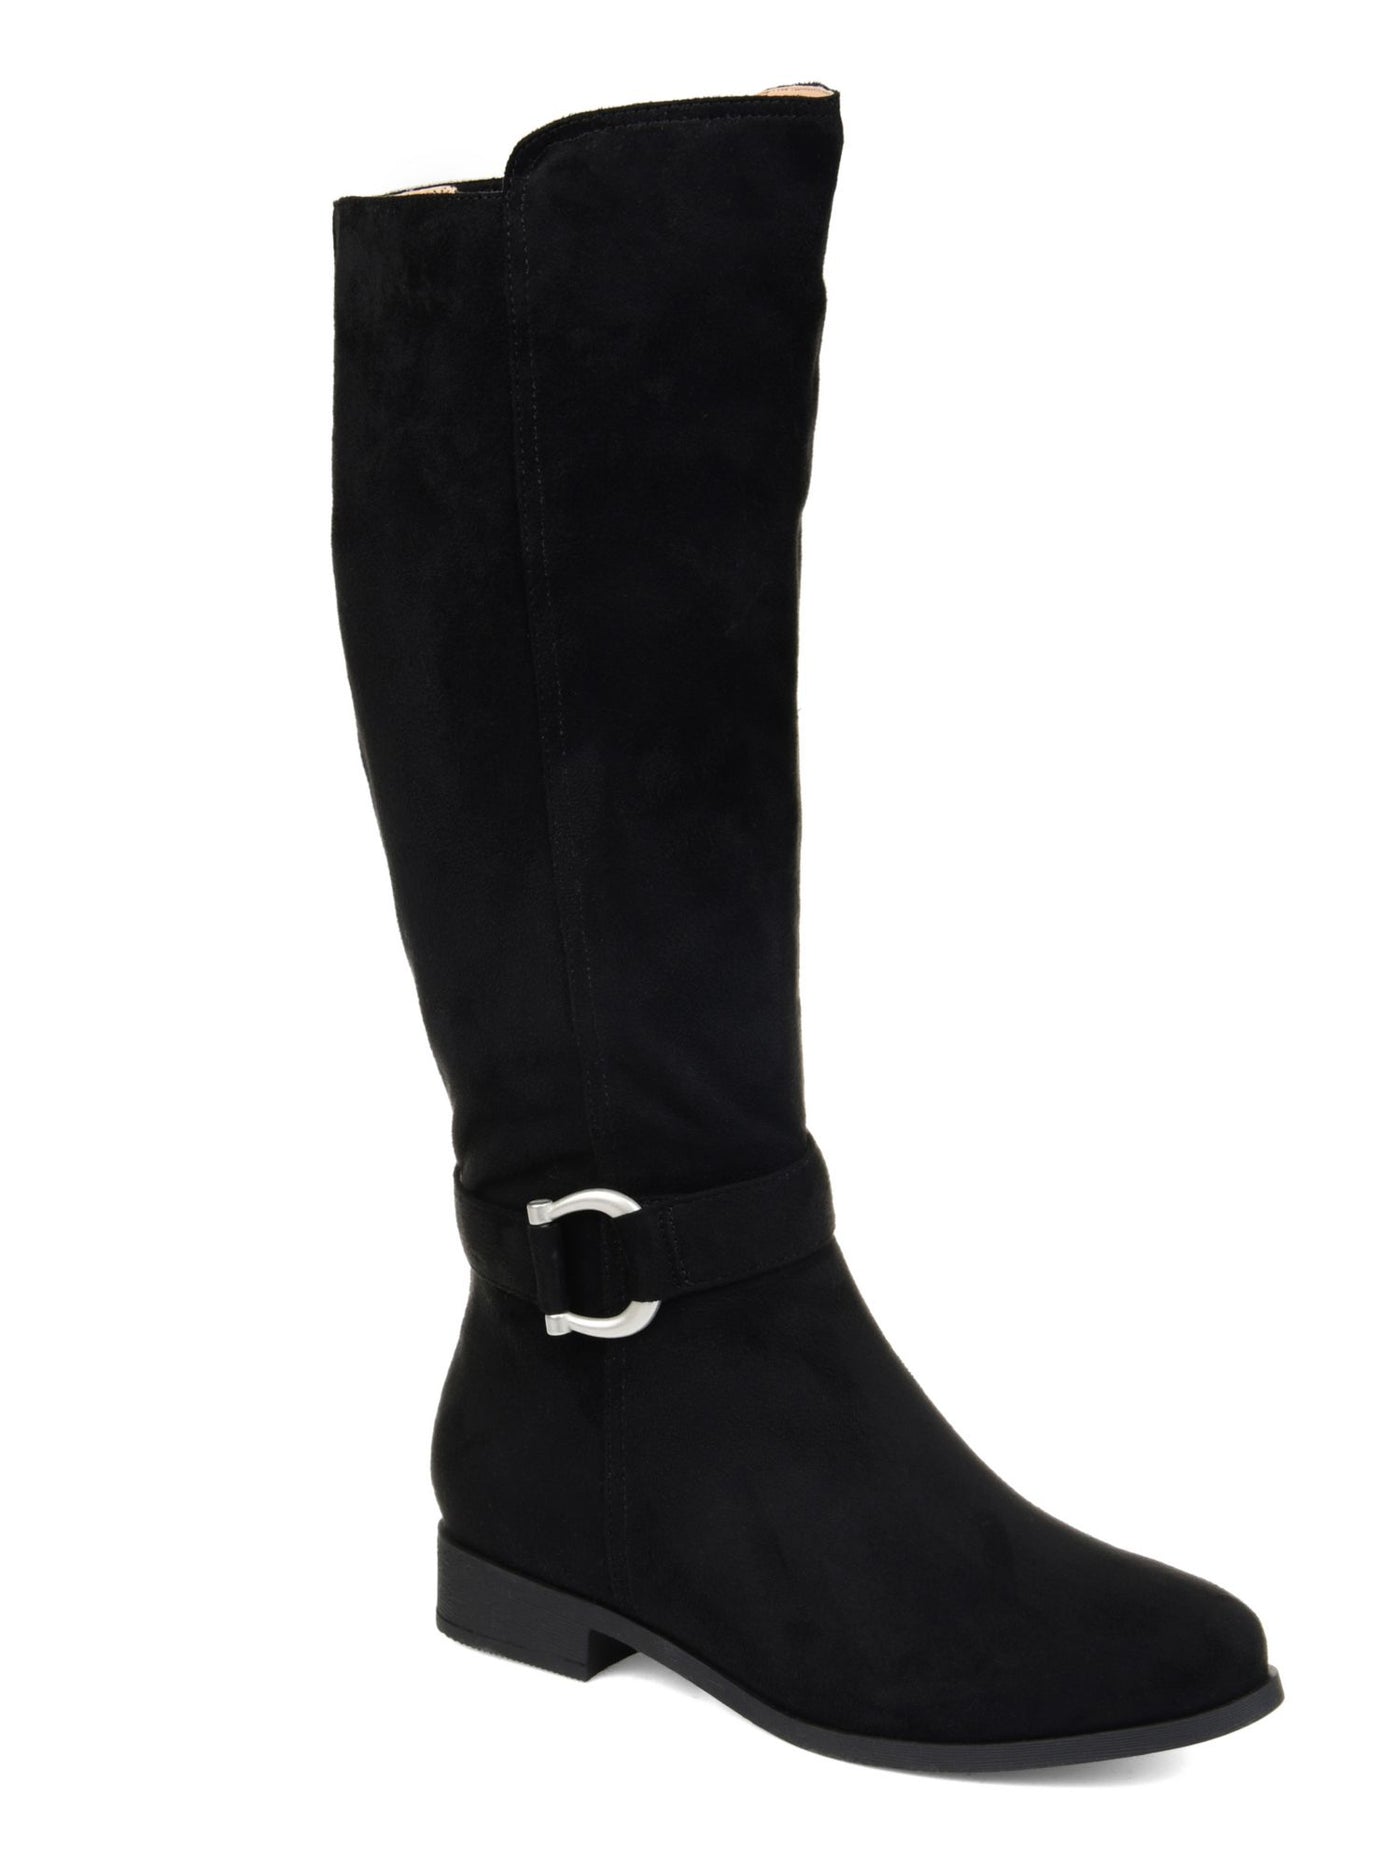 JOURNEE COLLECTION Womens Black Horse Shoe Buckle D Cushioned Wide Calf Cate Almond Toe Block Heel Lace-Up Riding Boot 7.5